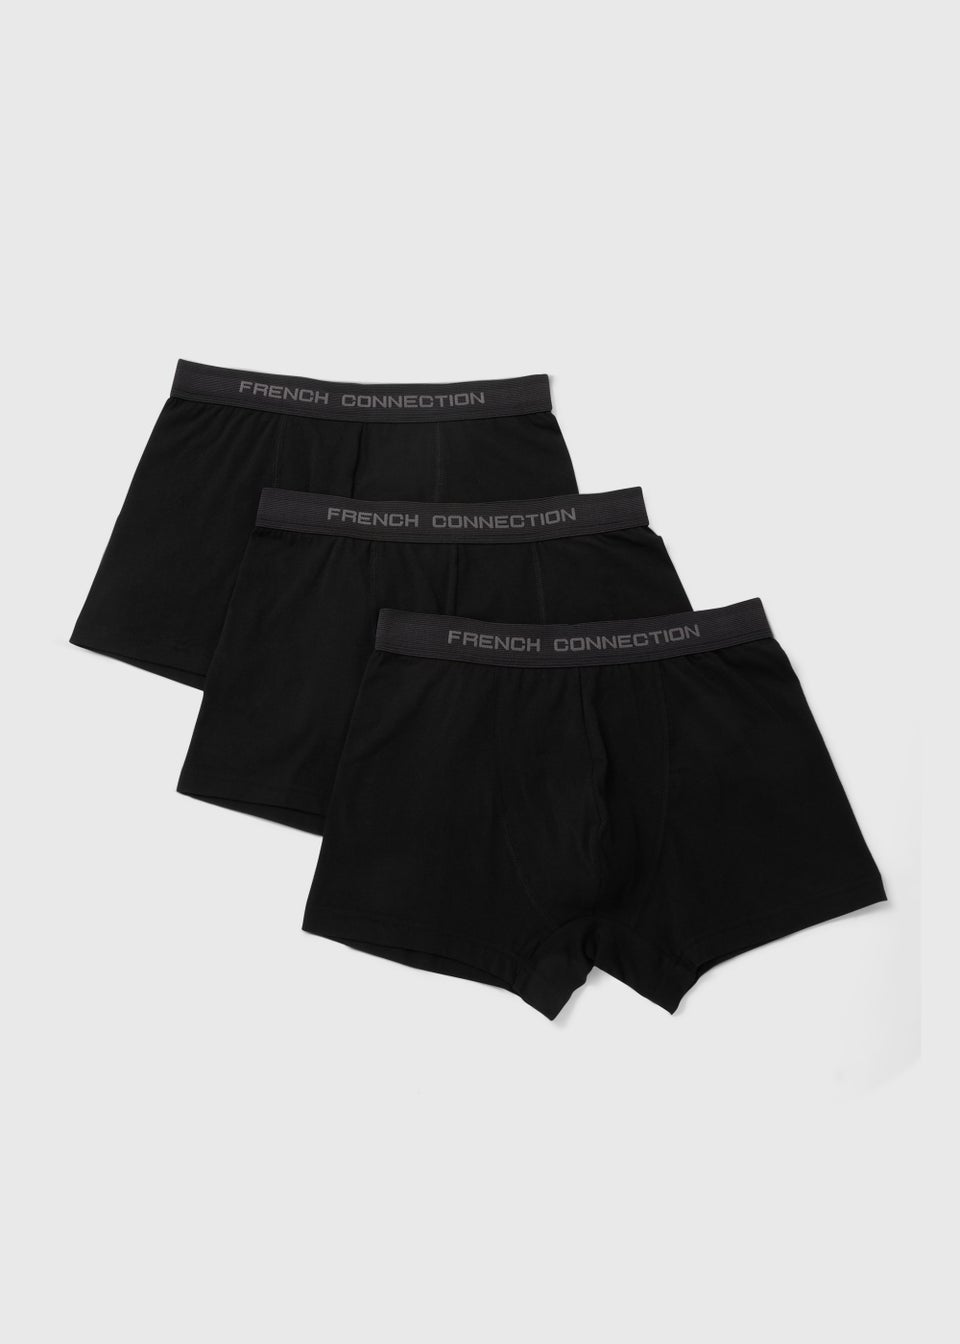 French Connection 3 Pack Black Boxers